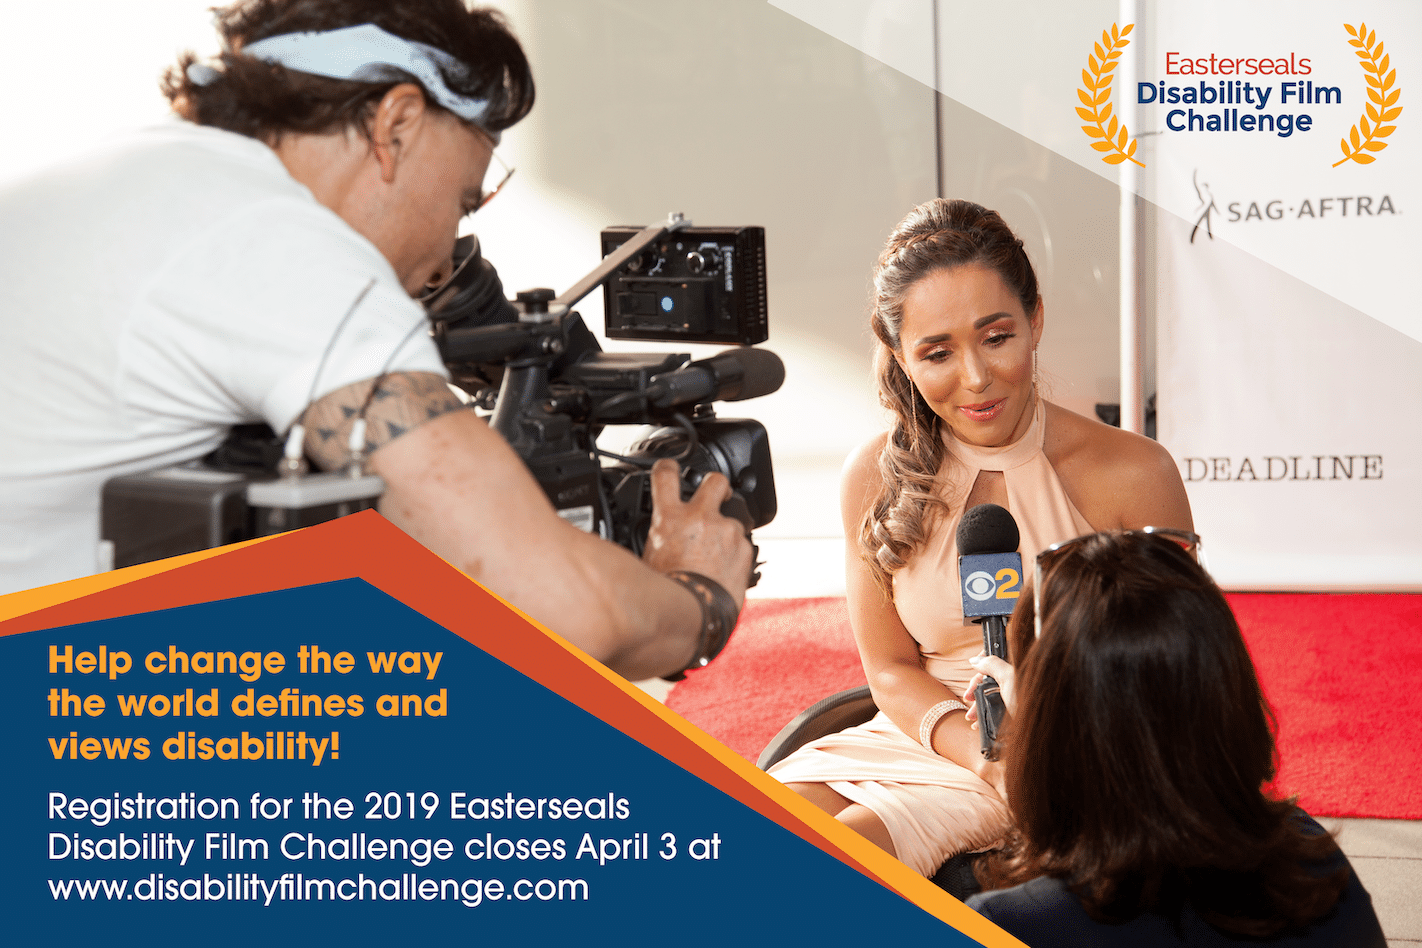 Tamara Mena in wheelchair being filmed by a camera man. Text reads, "Help change the way the world defines and views disability! Registration for the 2019 Easterseals Disability Film Challenge closes April 3 at www.disabilityfilmchallenge.com.